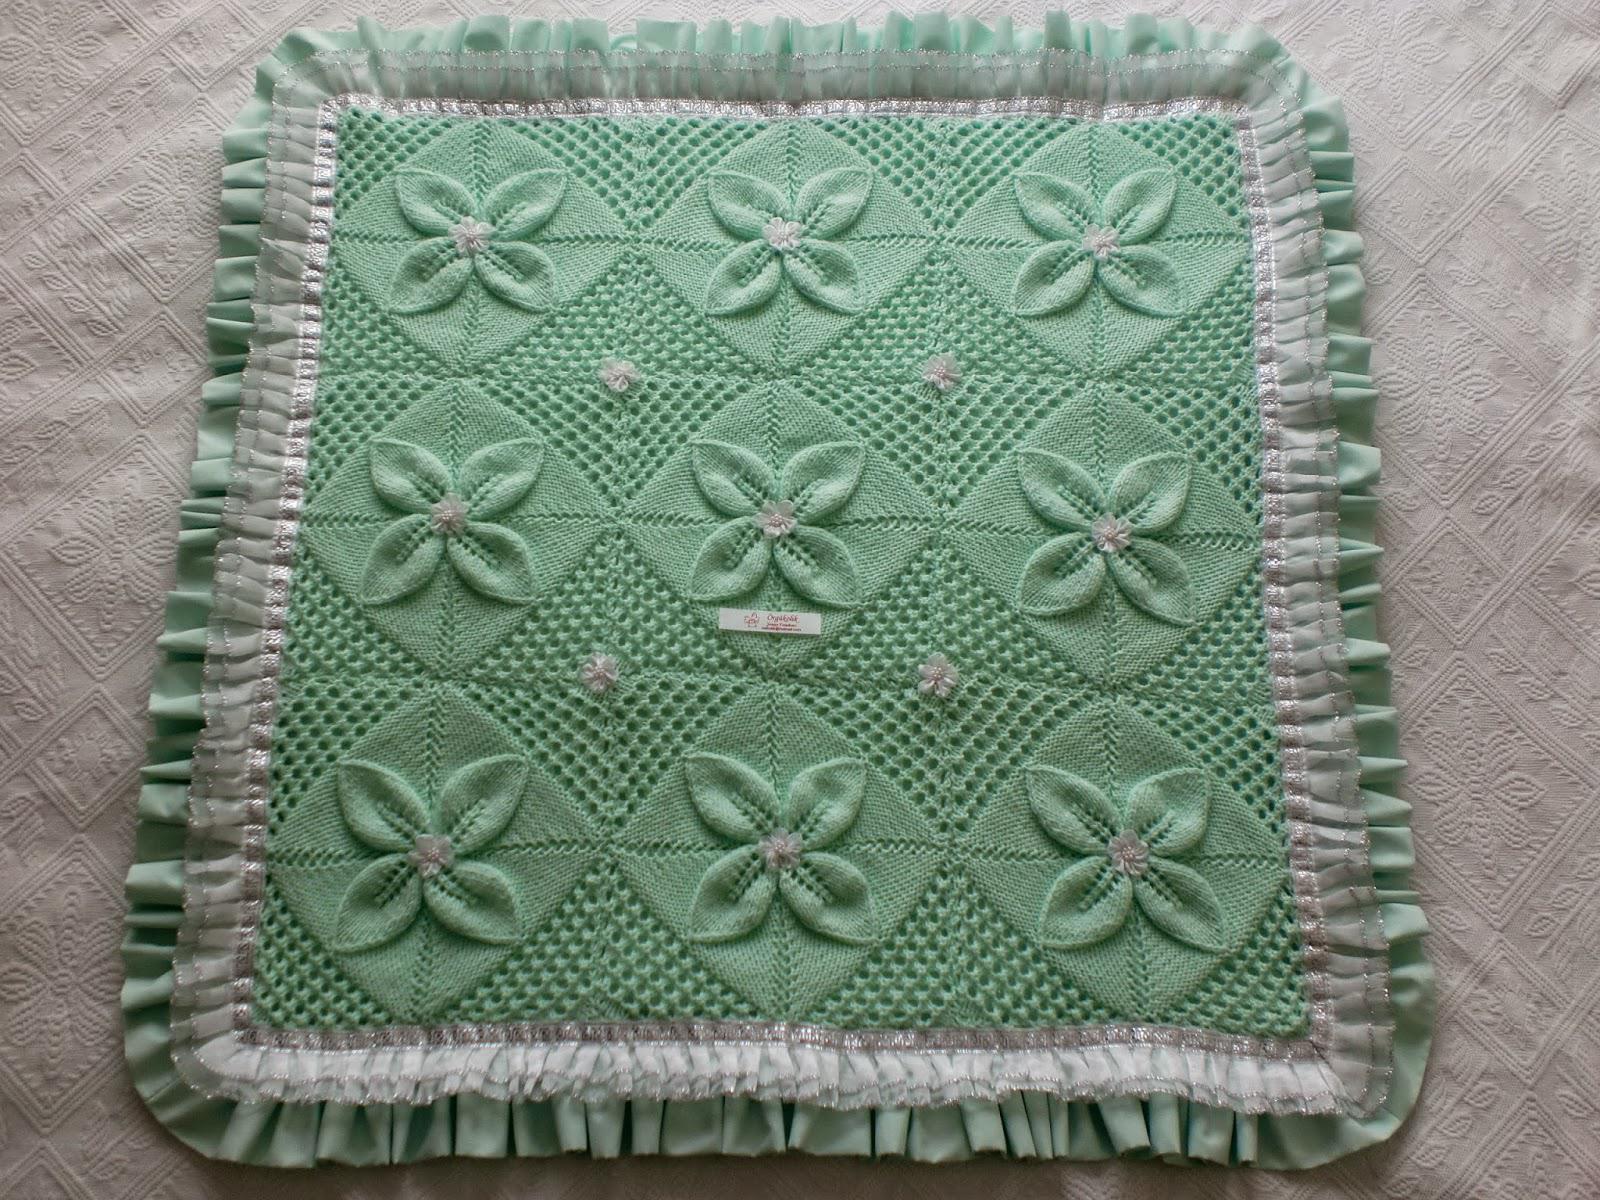 Knitting A Baby Blanket Patterns